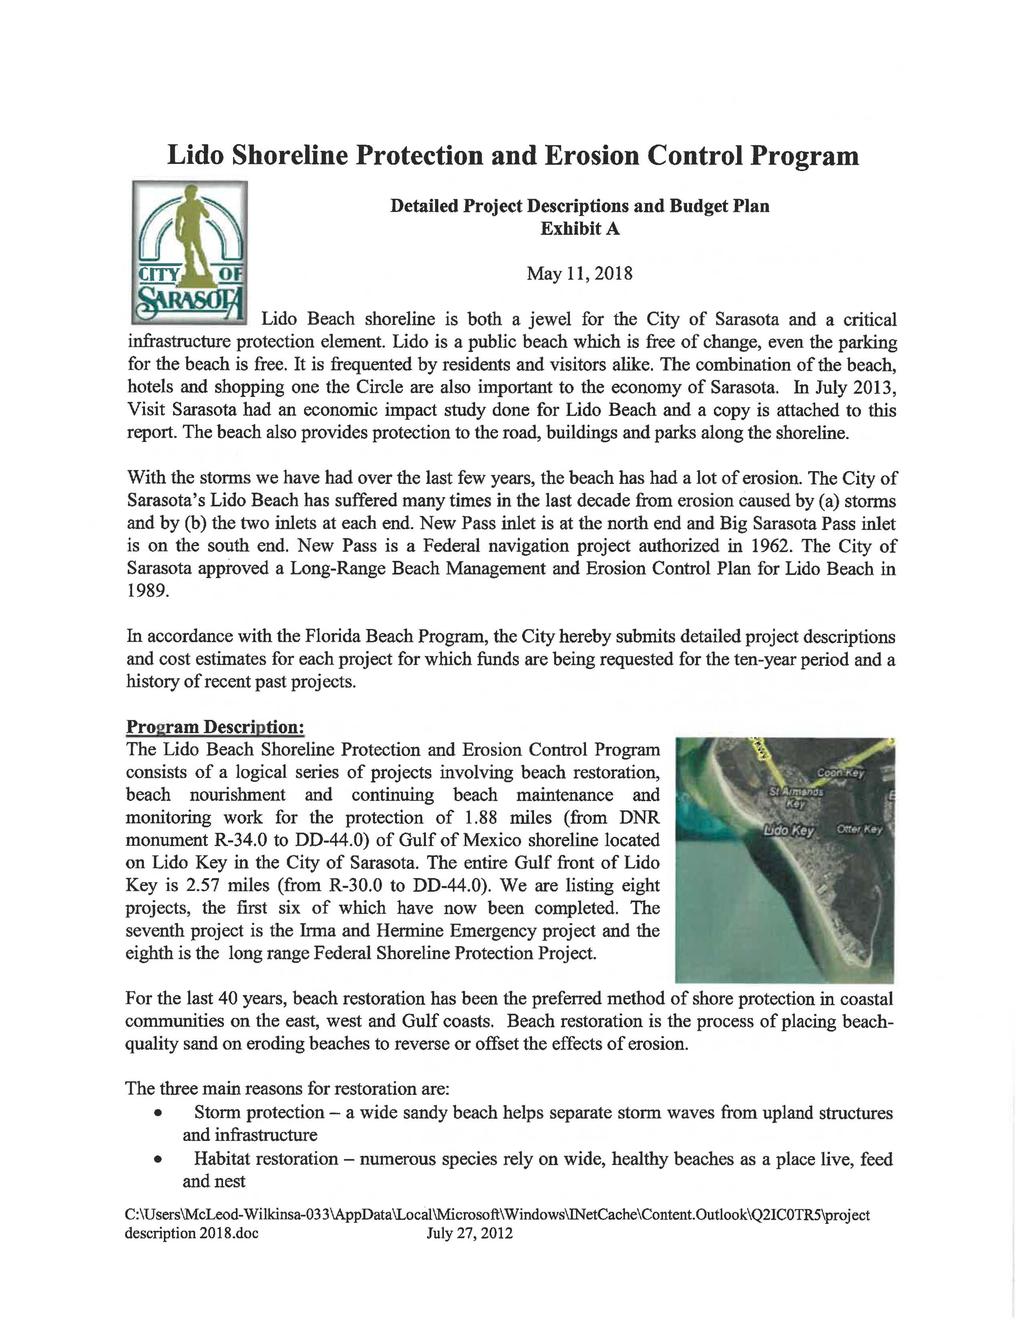 Lido Shoreline Protection and Erosion Control Program Detailed Project Descriptions and Budget Plan Exhibit A May 11, 2018 Lido Beach shoreline is both a jewel for the City of Sarasota and a critical